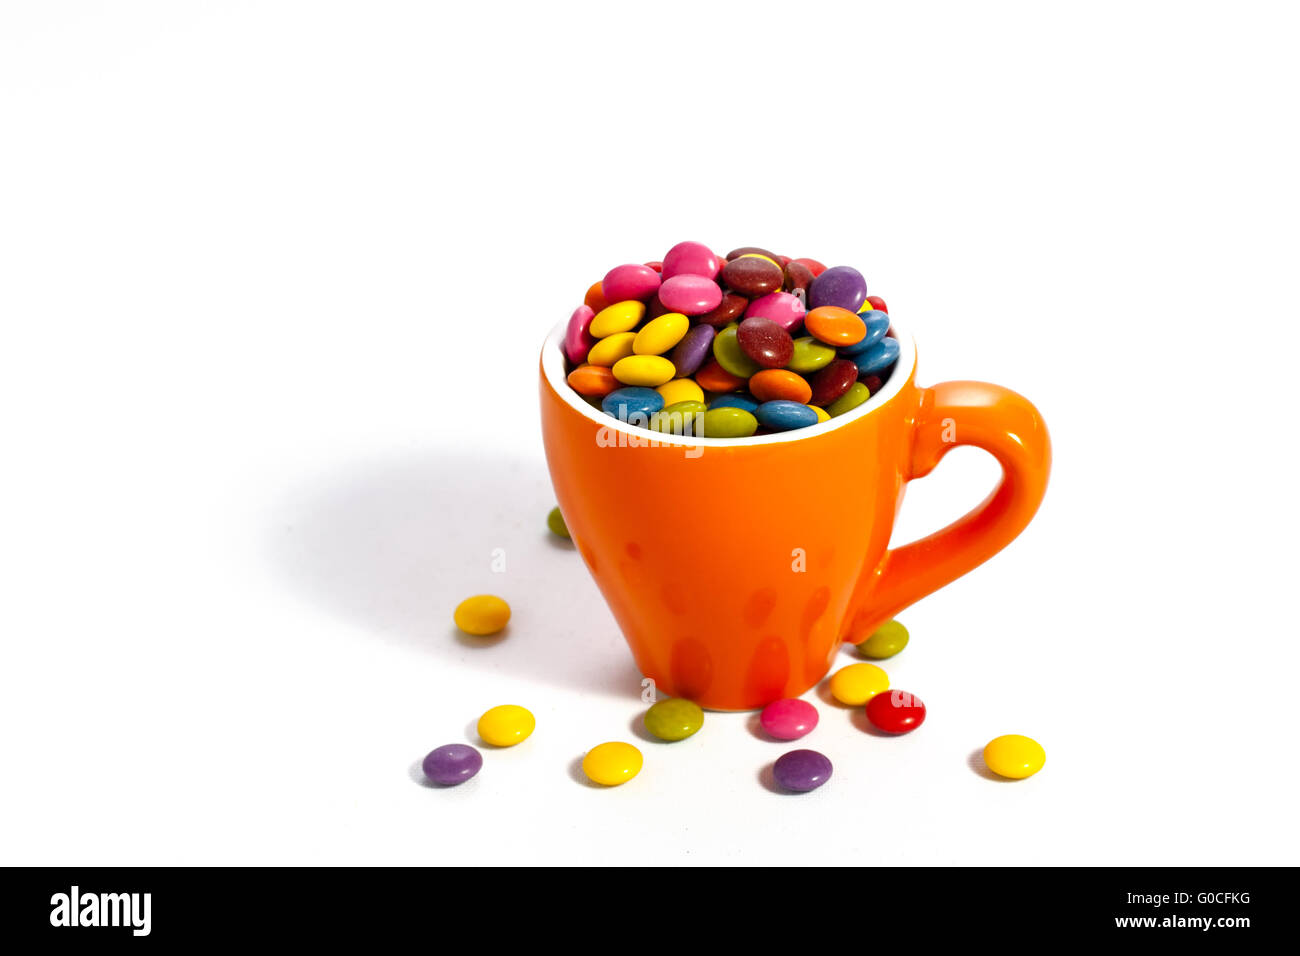 Colorful dragees in small orange colored cup on white Stock Photo